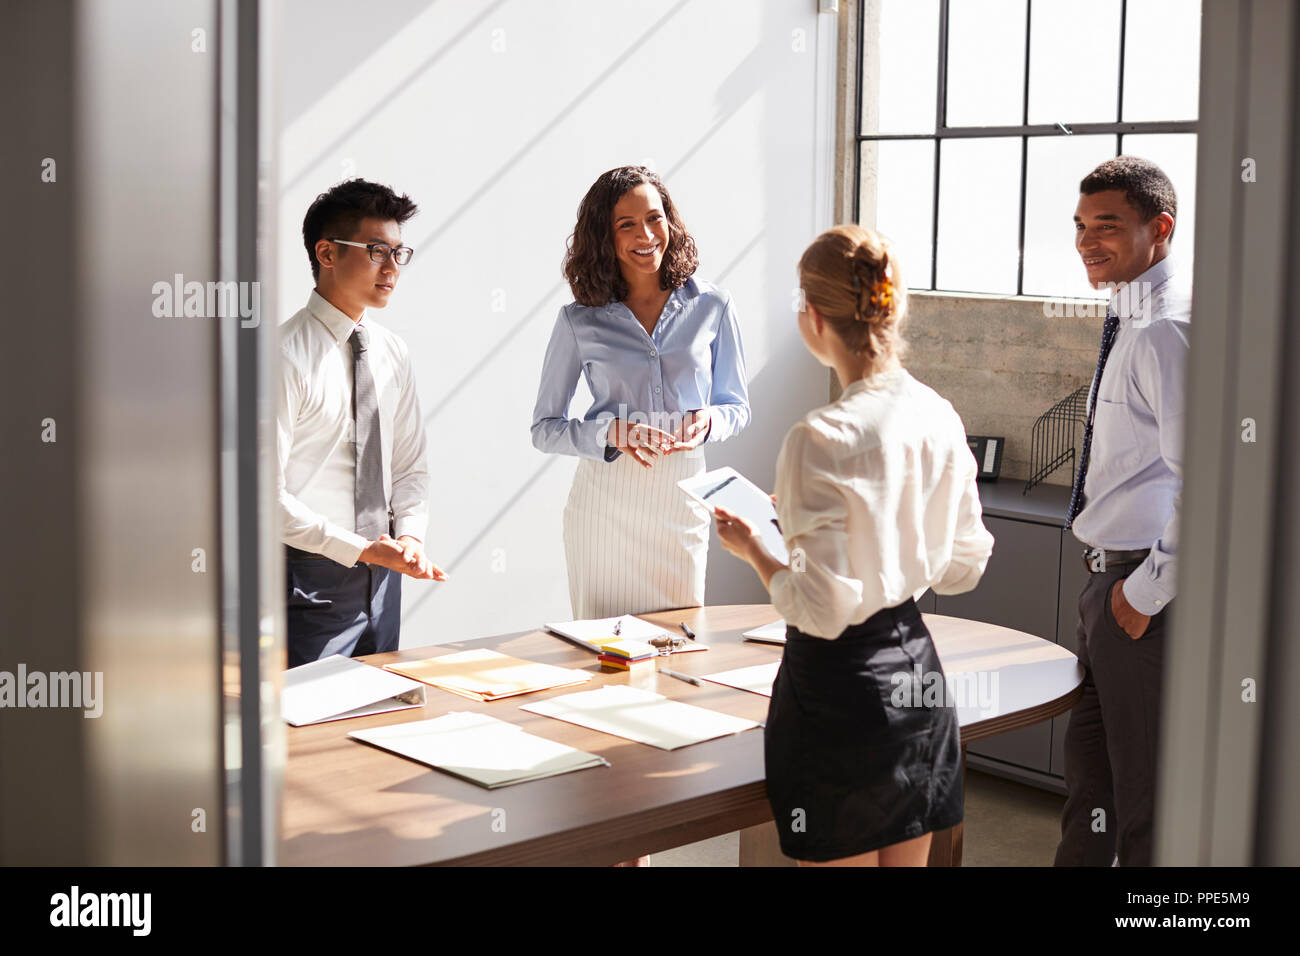 Four business colleagues working together in a small office Stock Photo